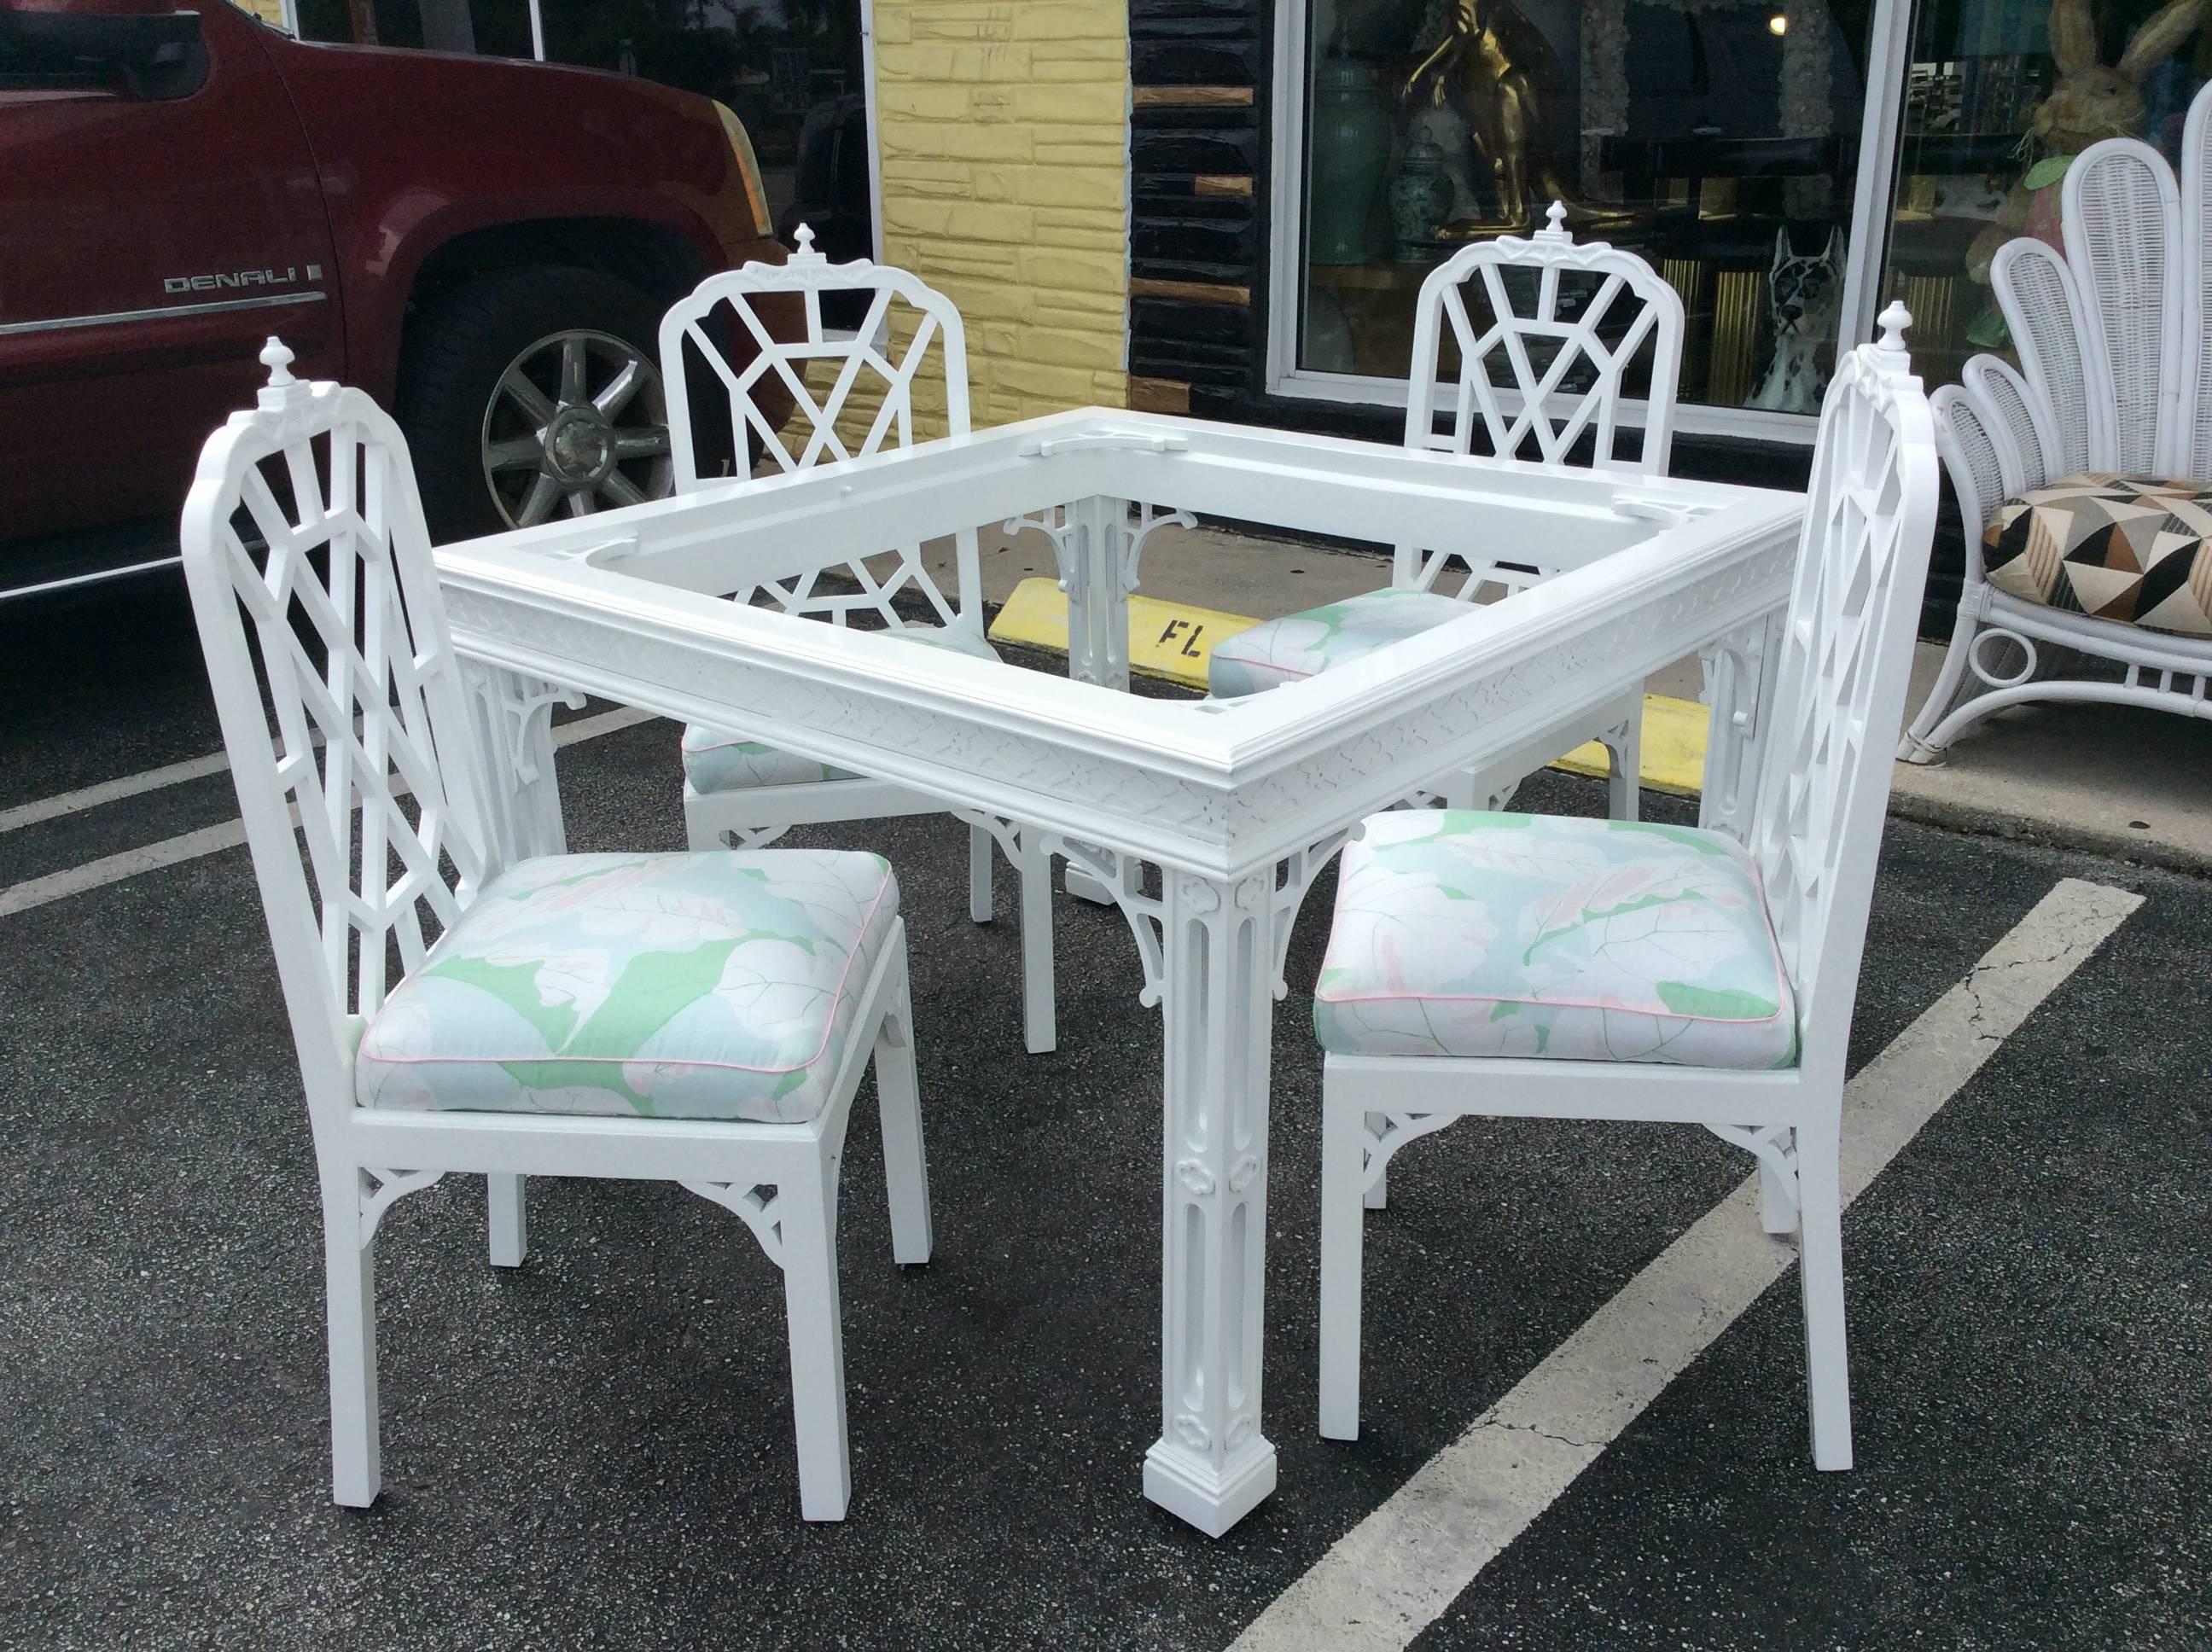 Absolutely amazing vintage Hollywood Palm Beach Regency set that includes newly lacquered fretwork Chinese Chippendale game or dining table, set of four newly lacquered white pagoda side chairs. Glass top for table is included. Chairs have been